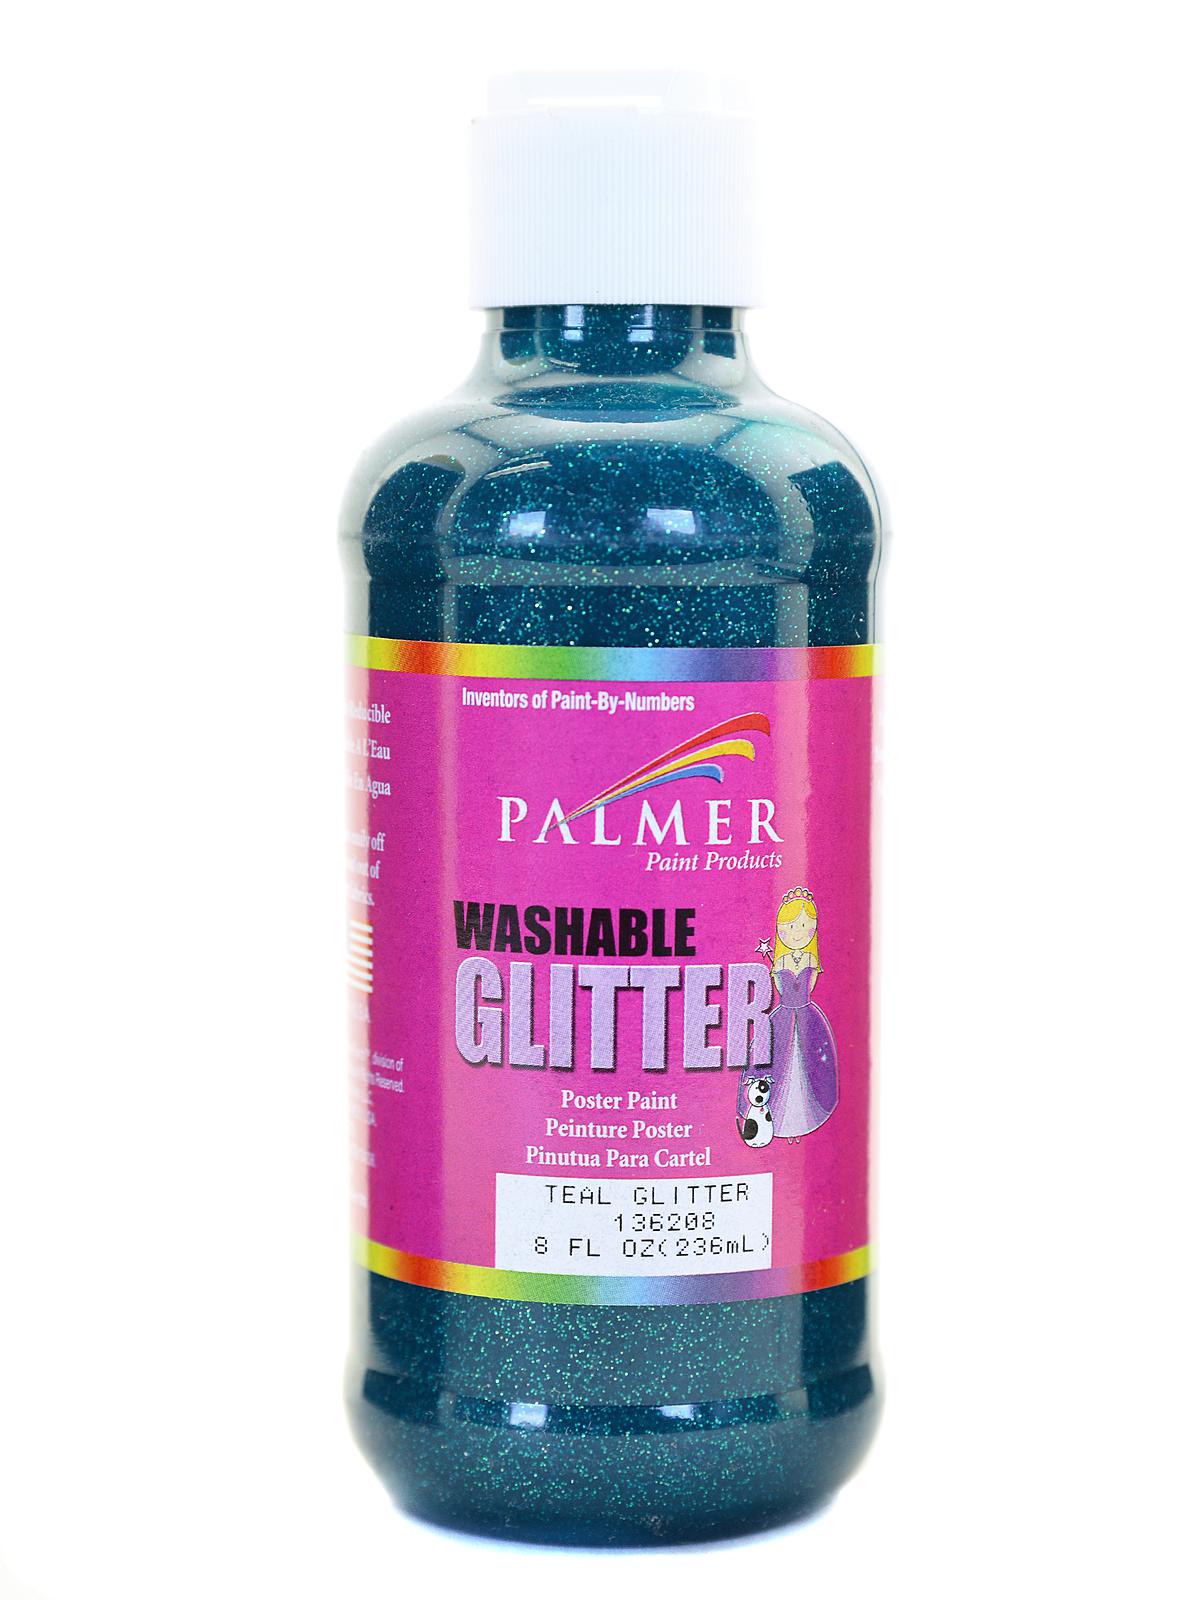 Washable Glitter Poster Paint Teal Glitter